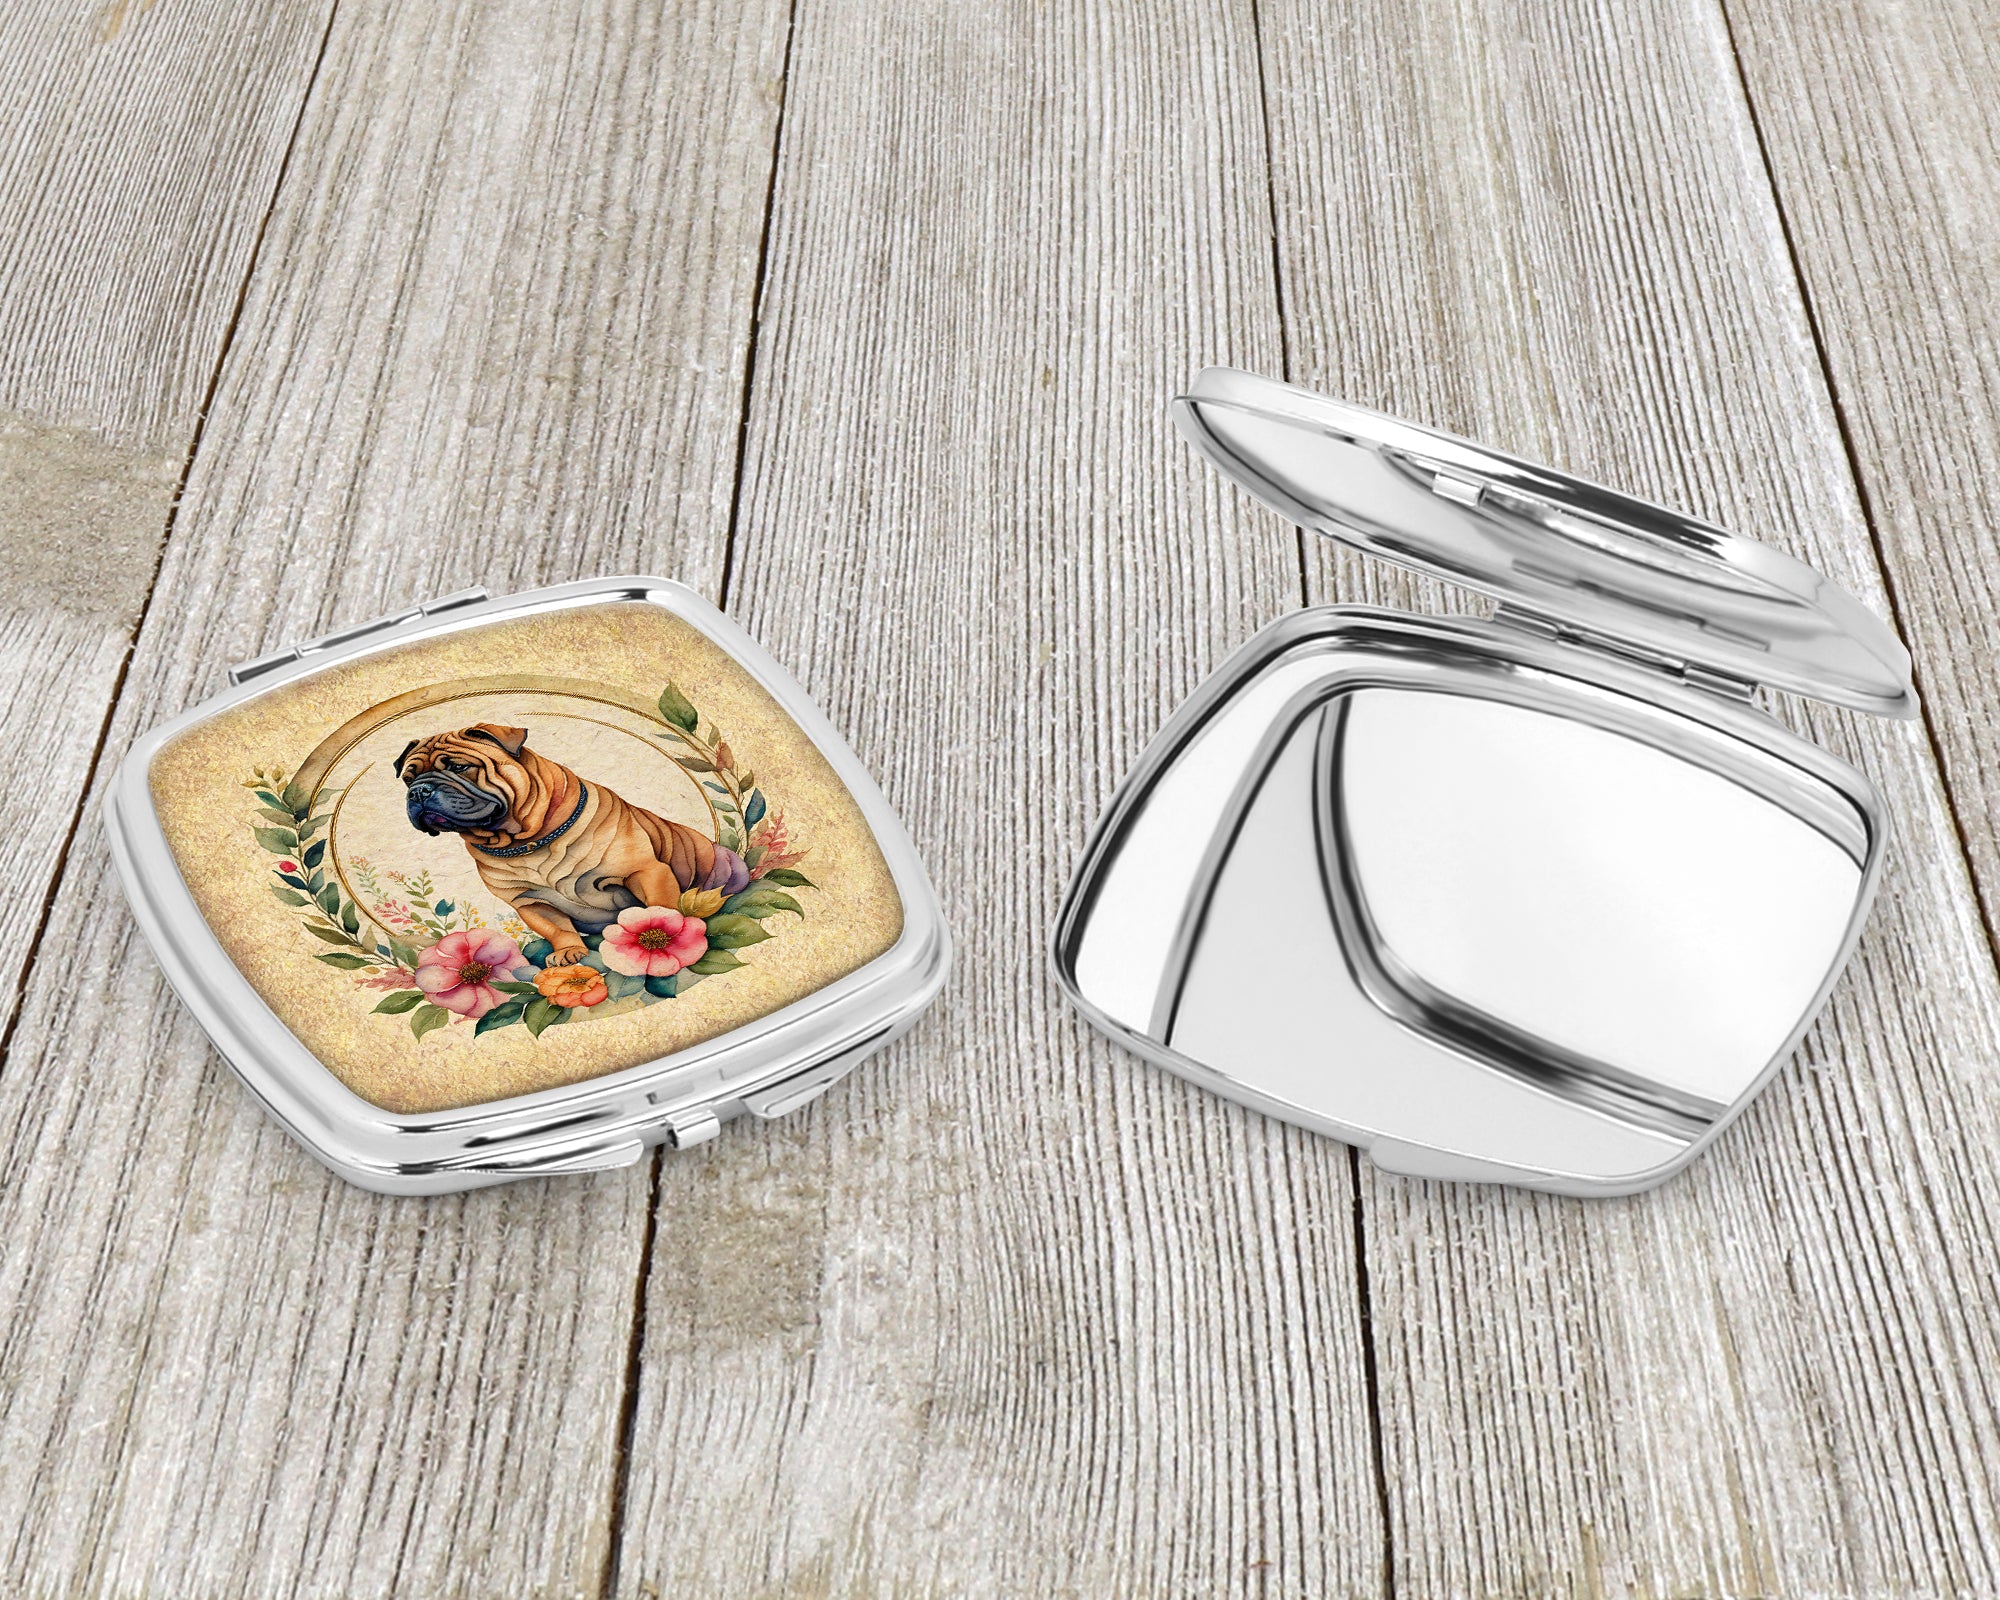 Shar Pei and Flowers Compact Mirror